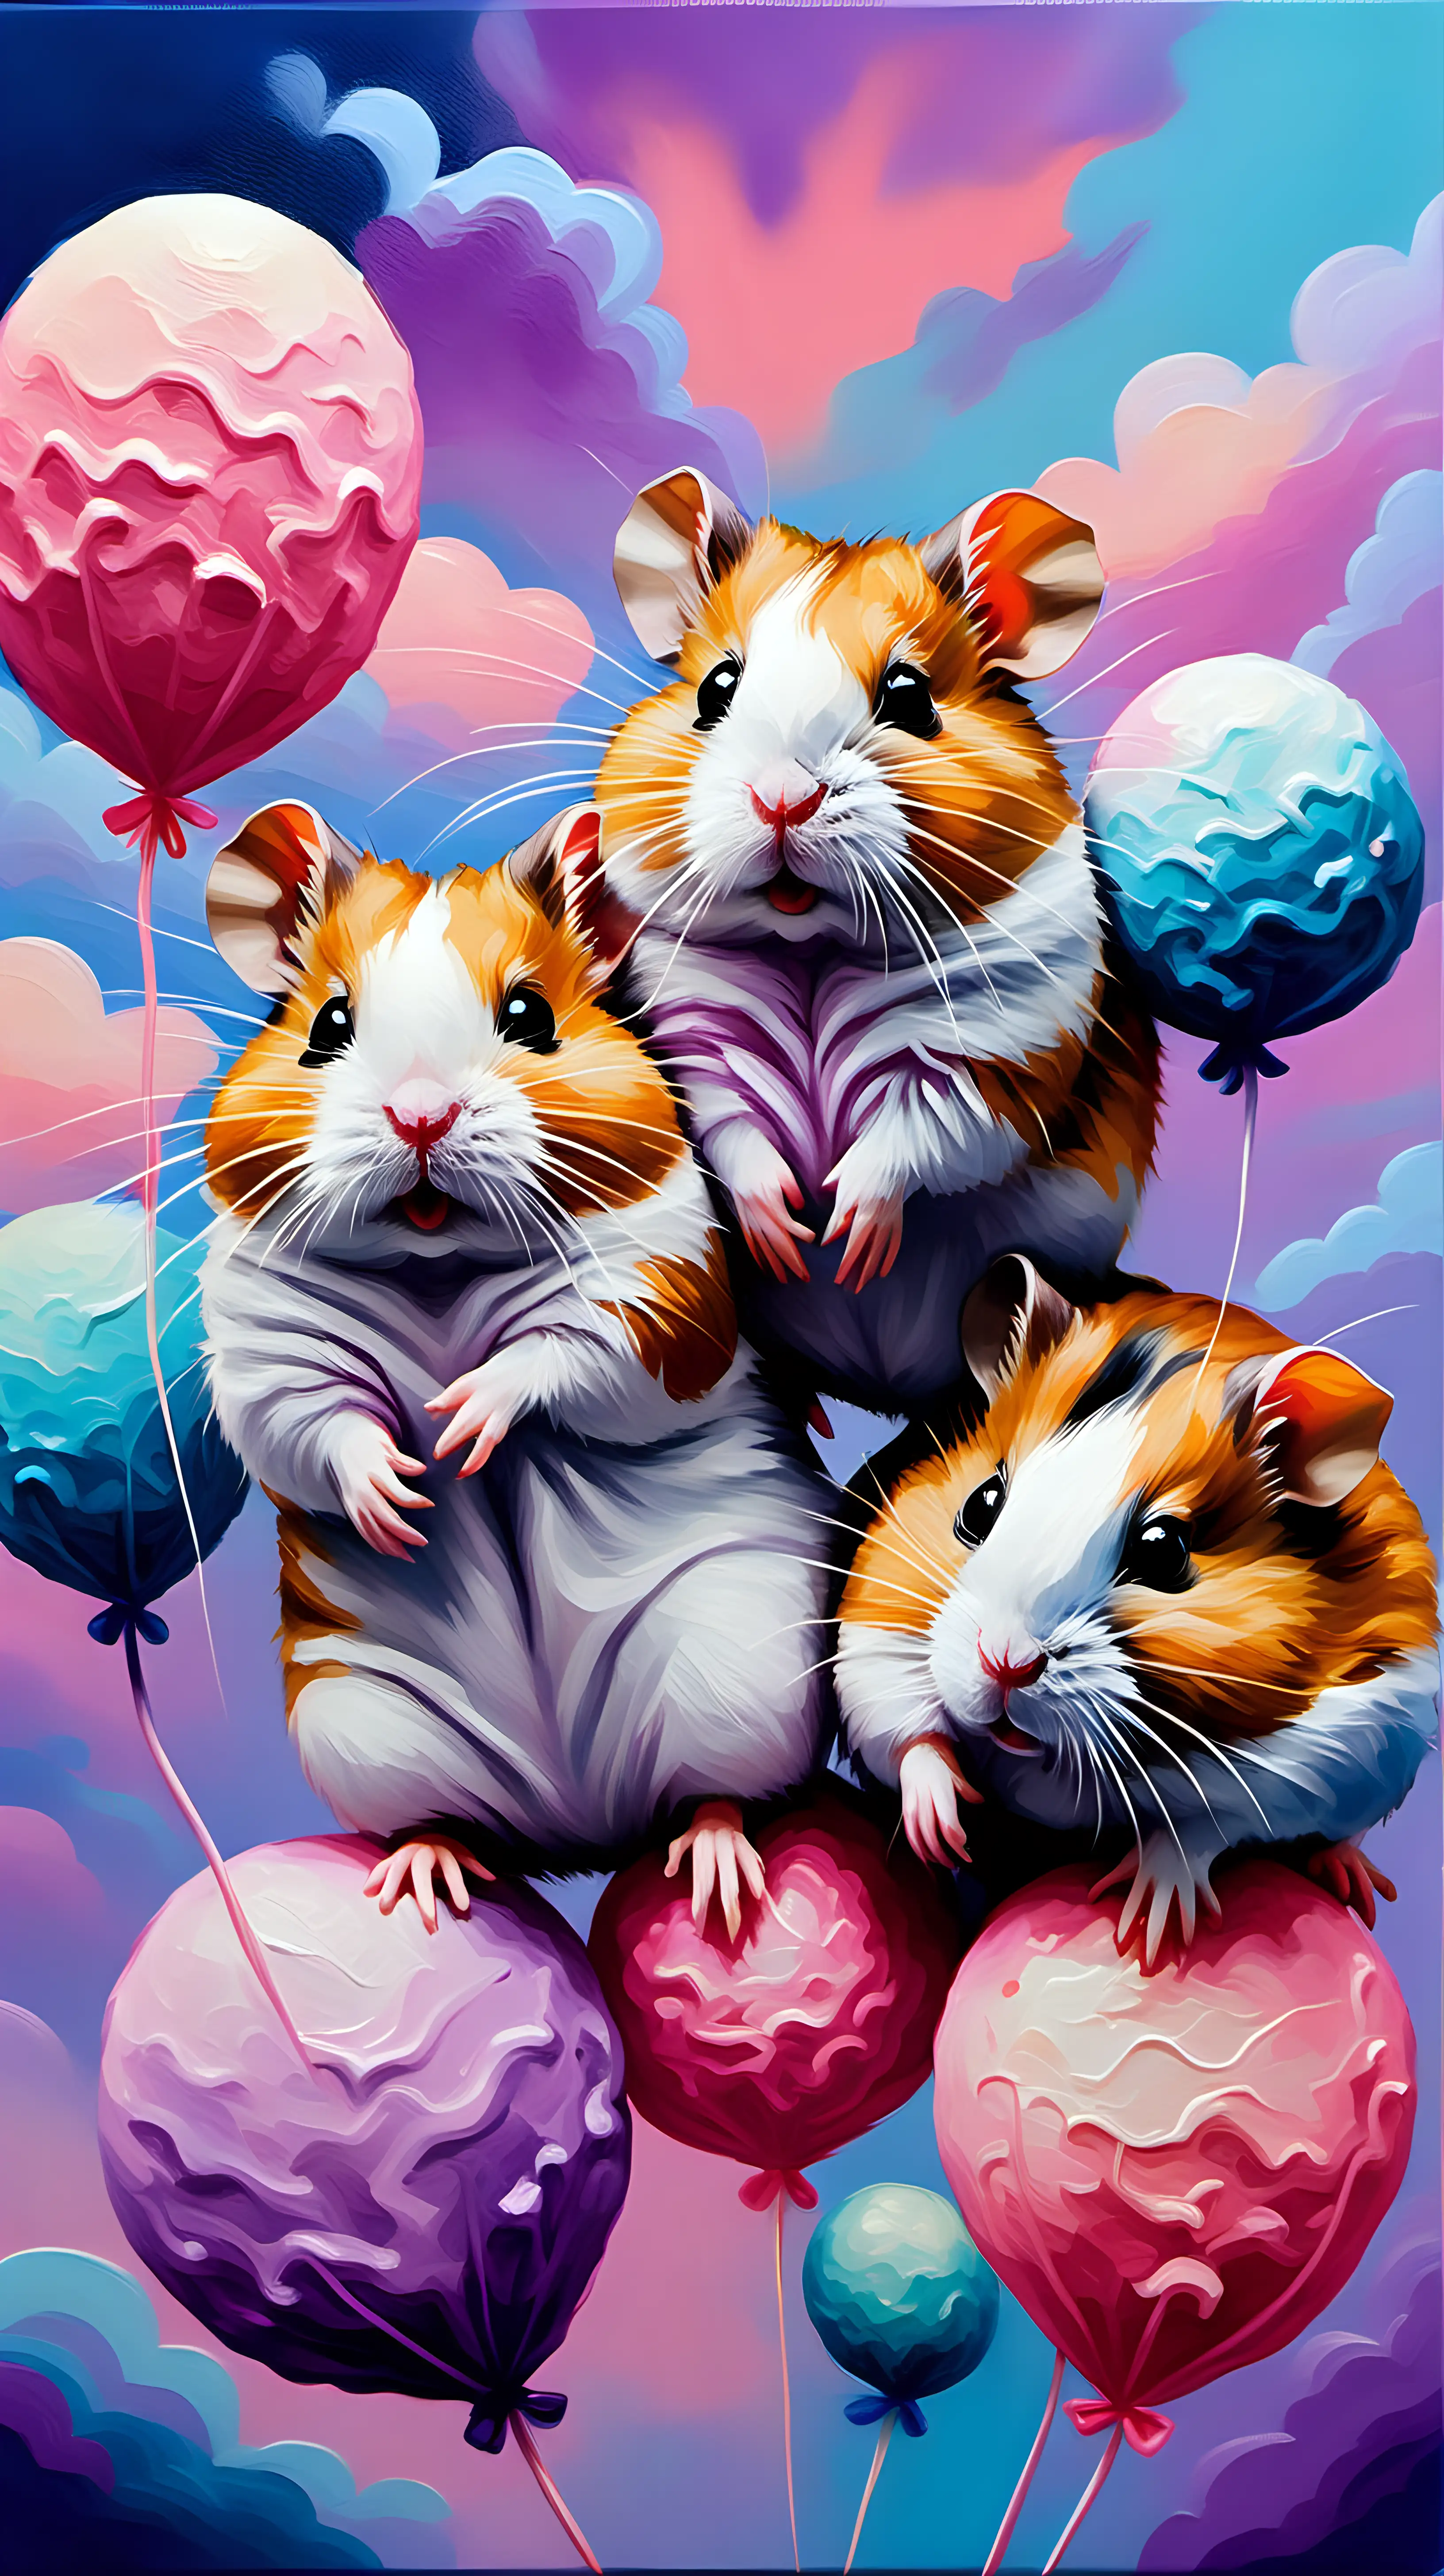 acrylic painting of a hamsters, in the style of acrylic paint, richly colored skies, in cotton candy colors, add acrylic painting texture